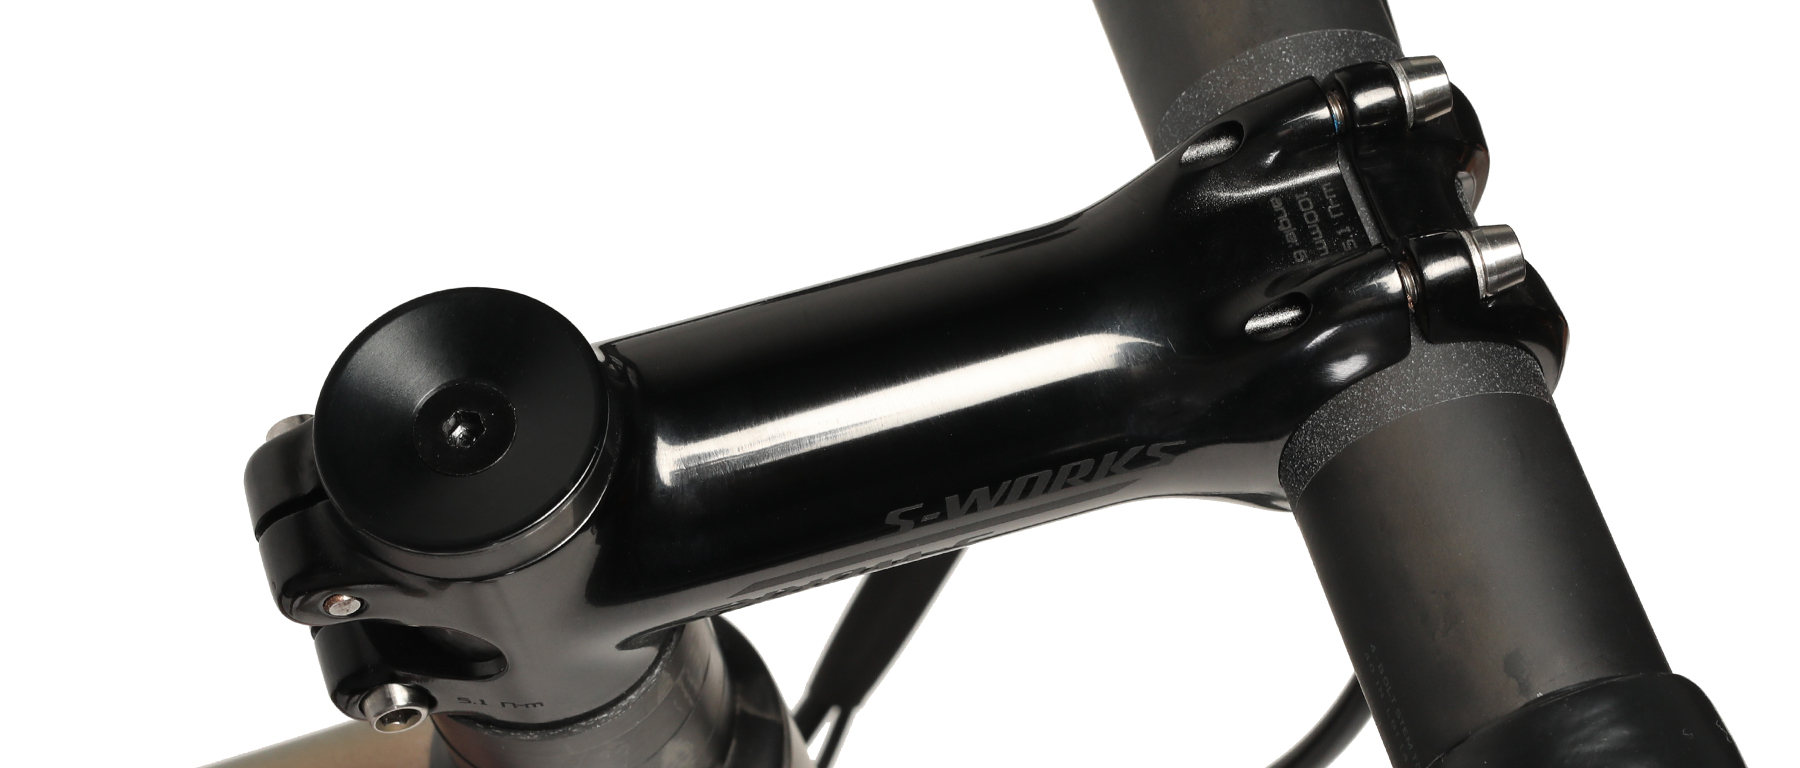 Specialized S-Works Aethos Dura-Ace Di2 Bicycle